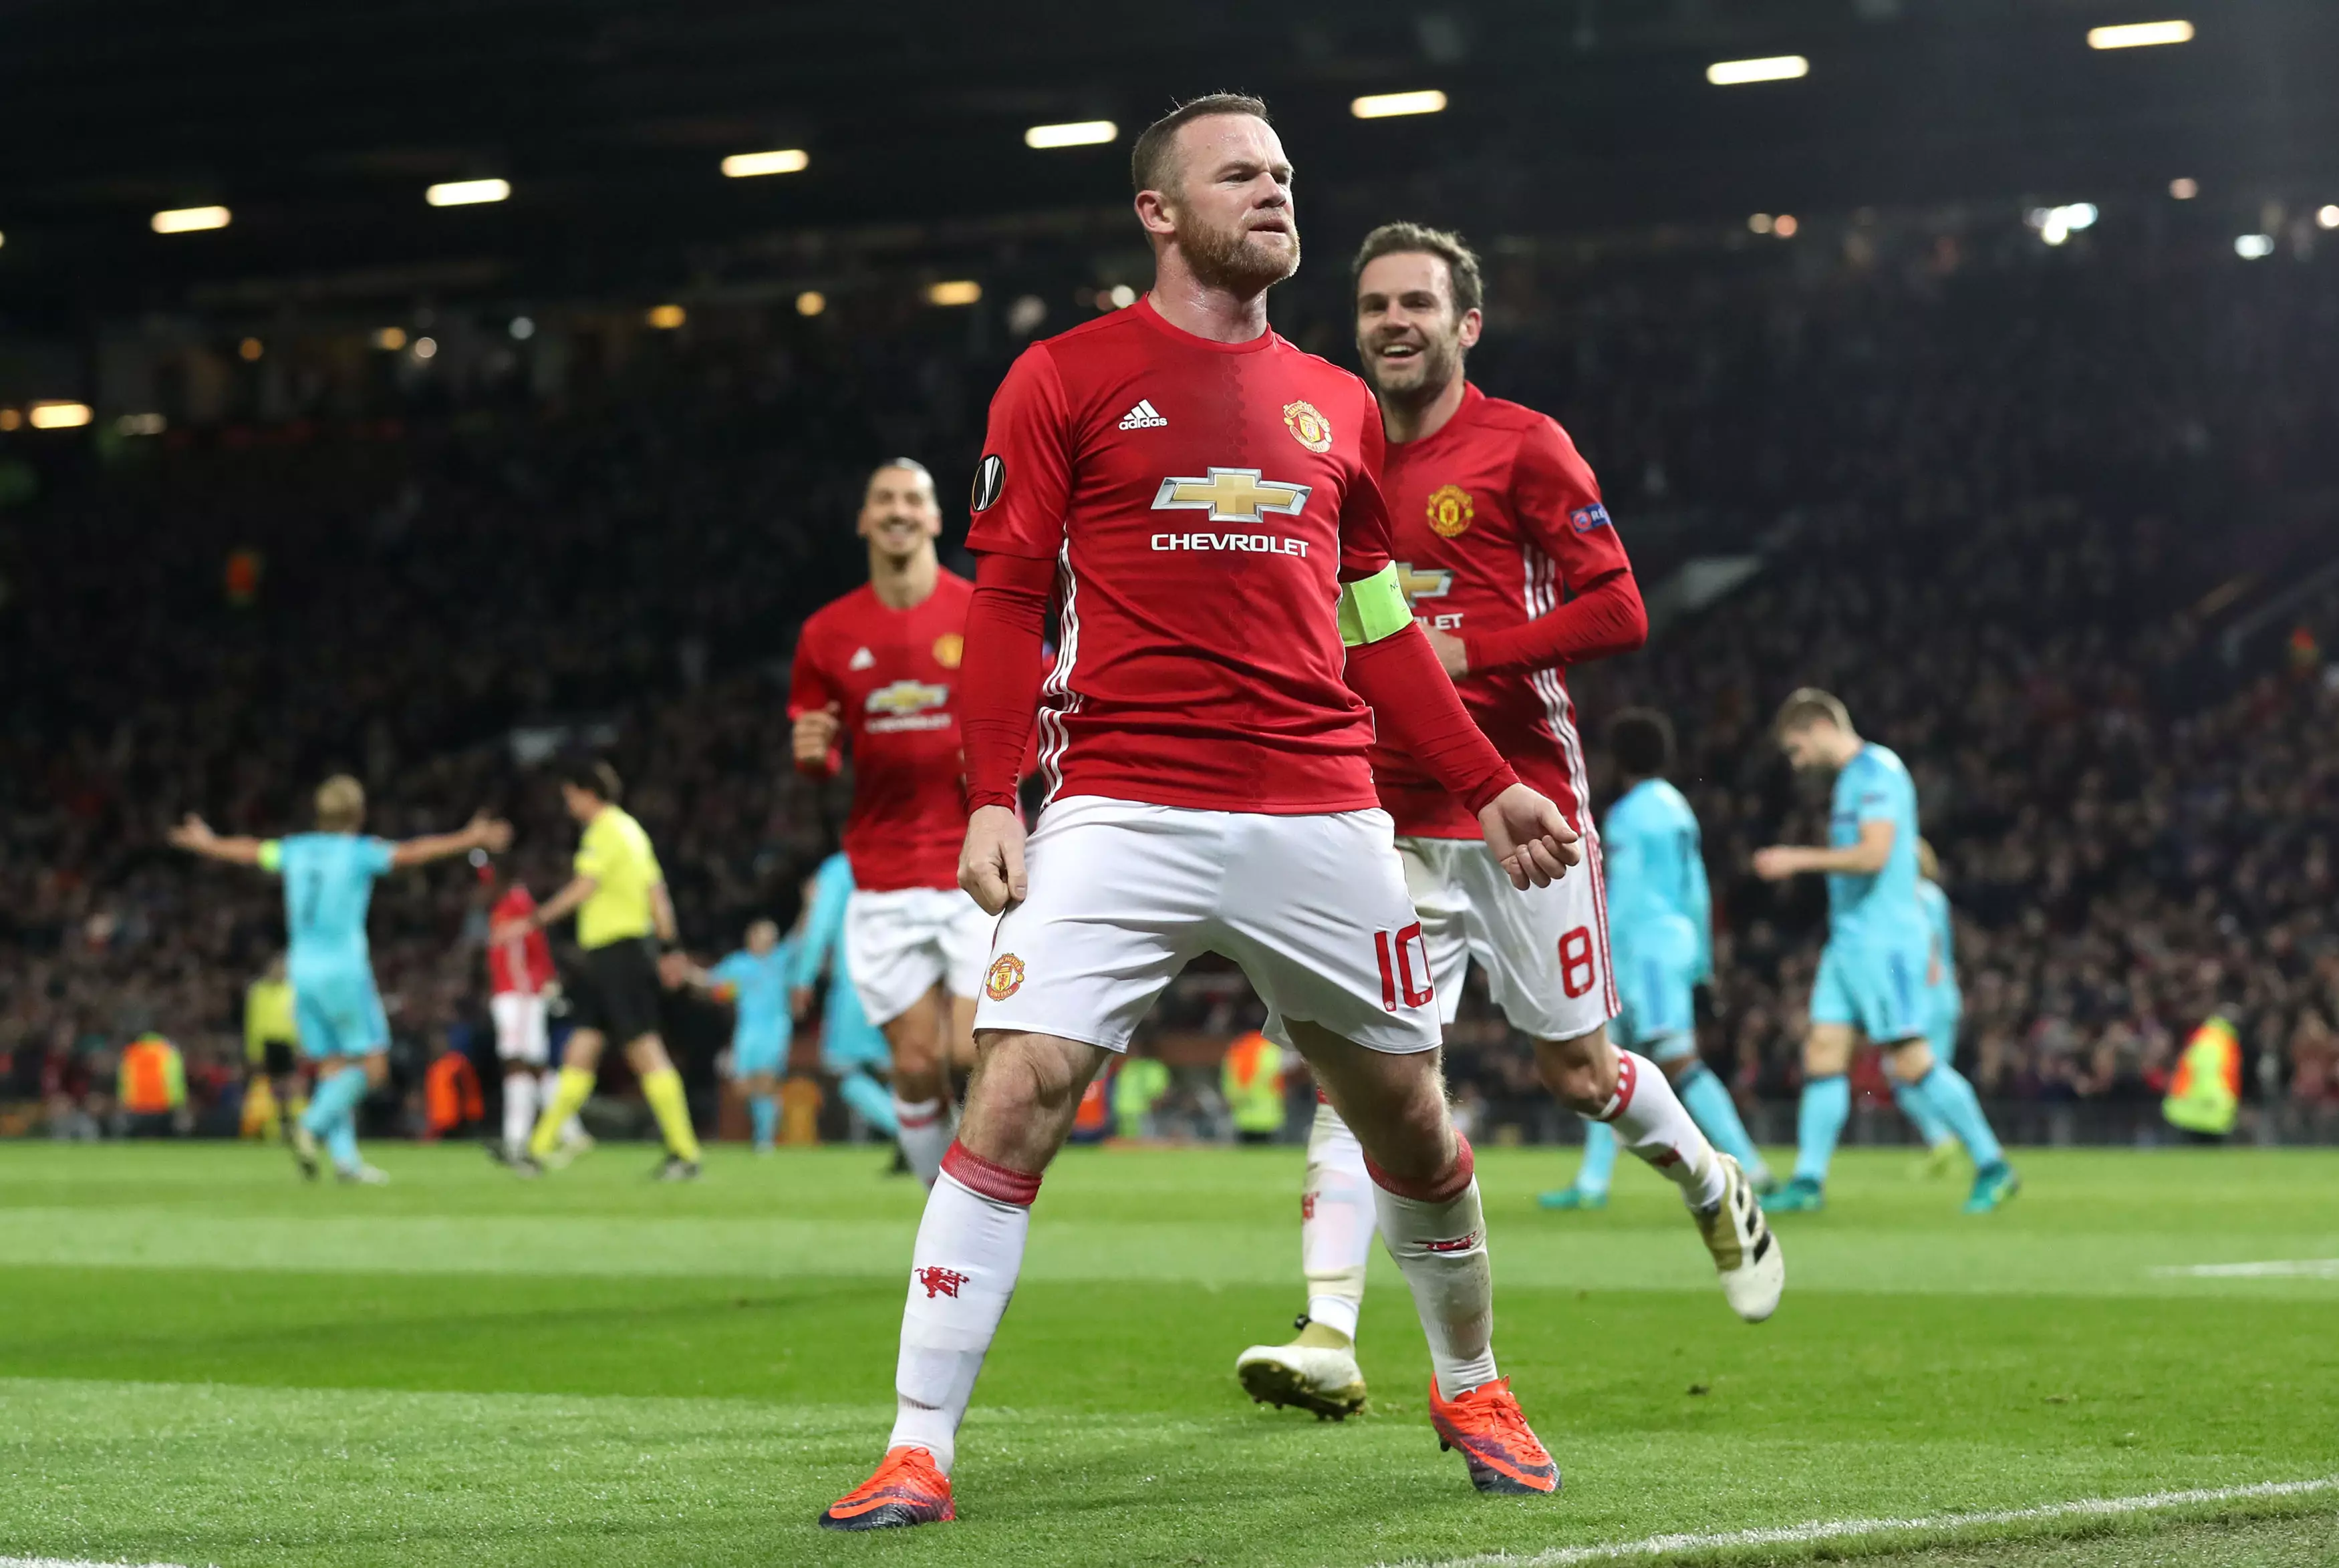 BREAKING: Wayne Rooney Becomes All Time Manchester United Top Scorer